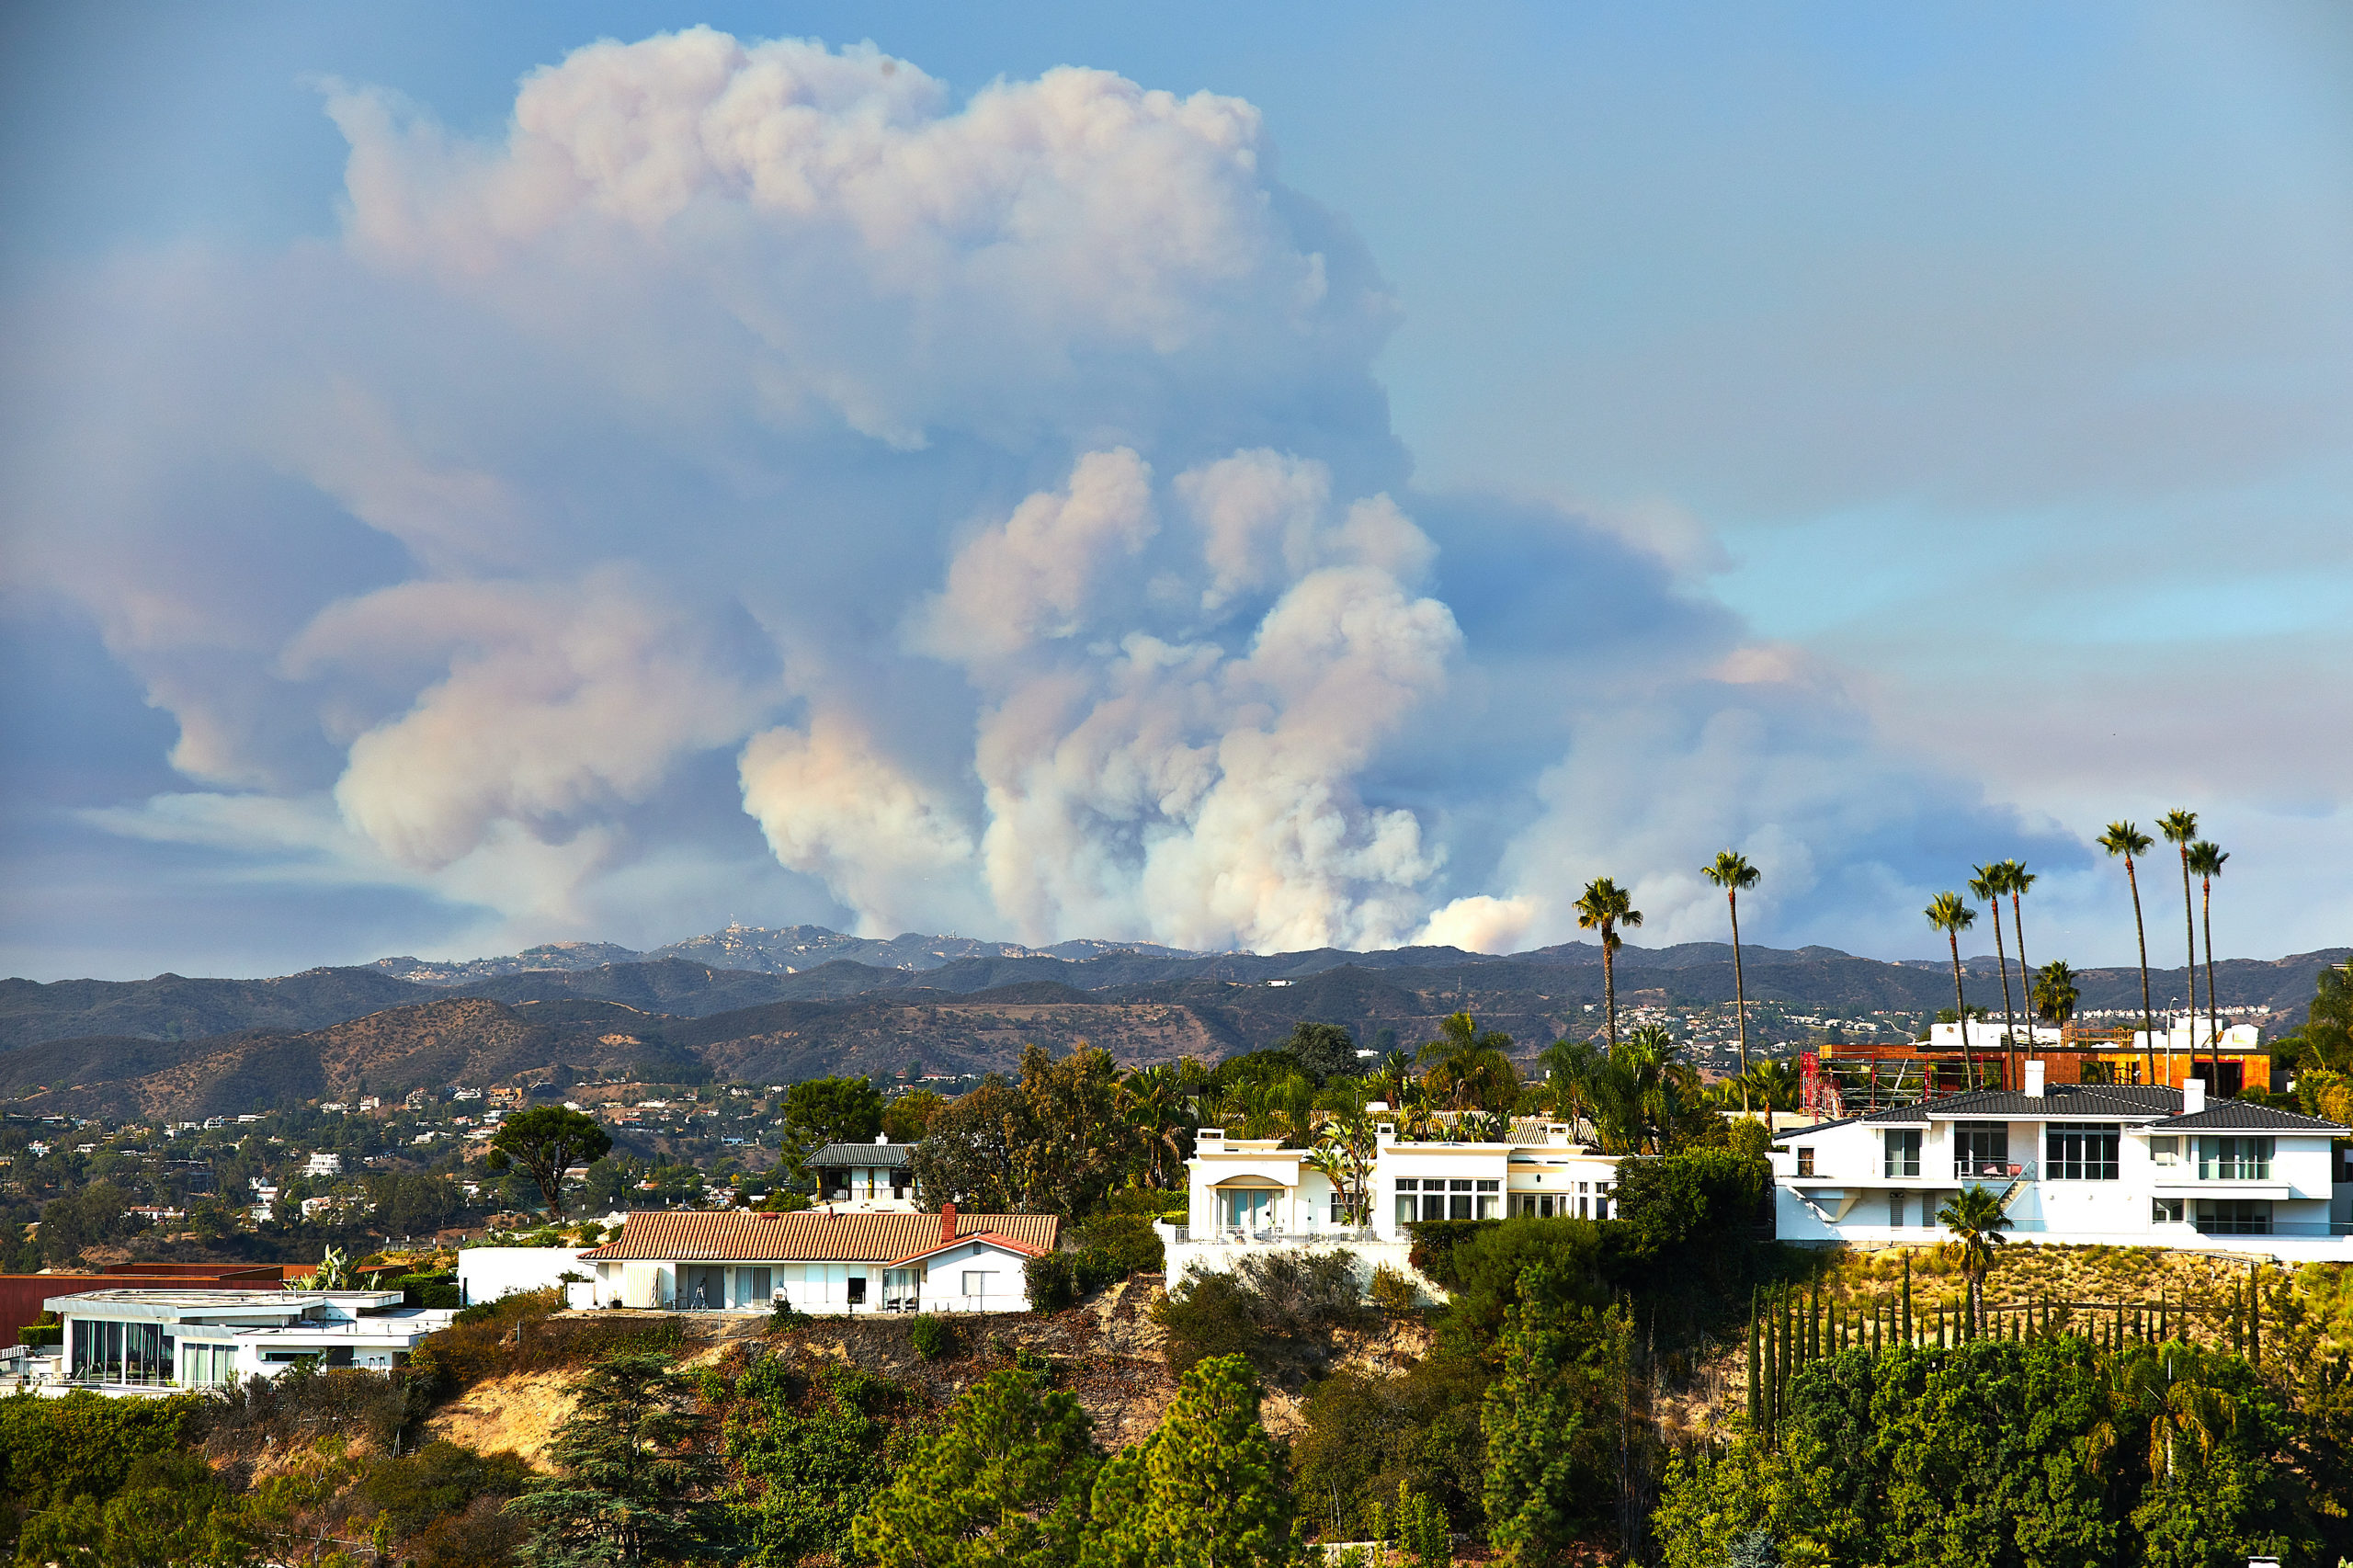 A smoke plume from the 2018 Woolsey Fire seen from Hollywood Hills, CA